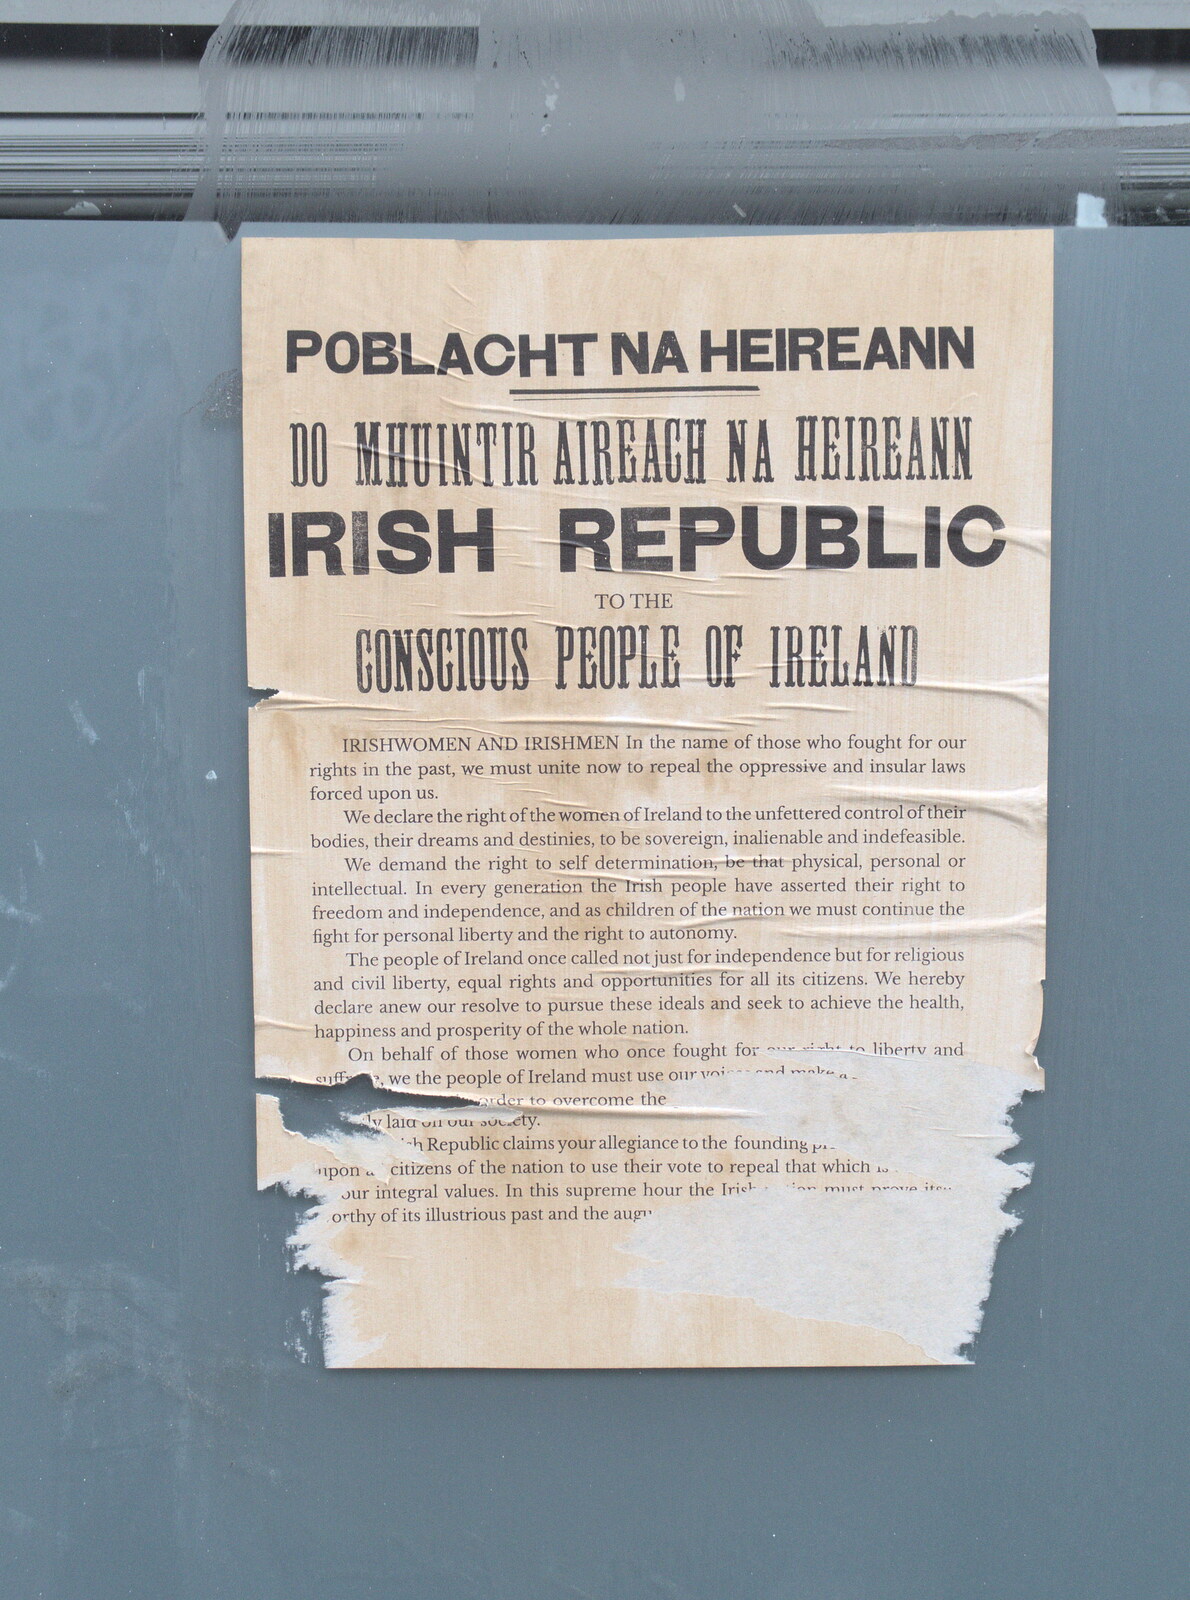 A pro-abortion-choice poster in a 1917 style from A Trip to Da Gorls, Monkstown Farm, County Dublin, Ireland - 4th August 2018